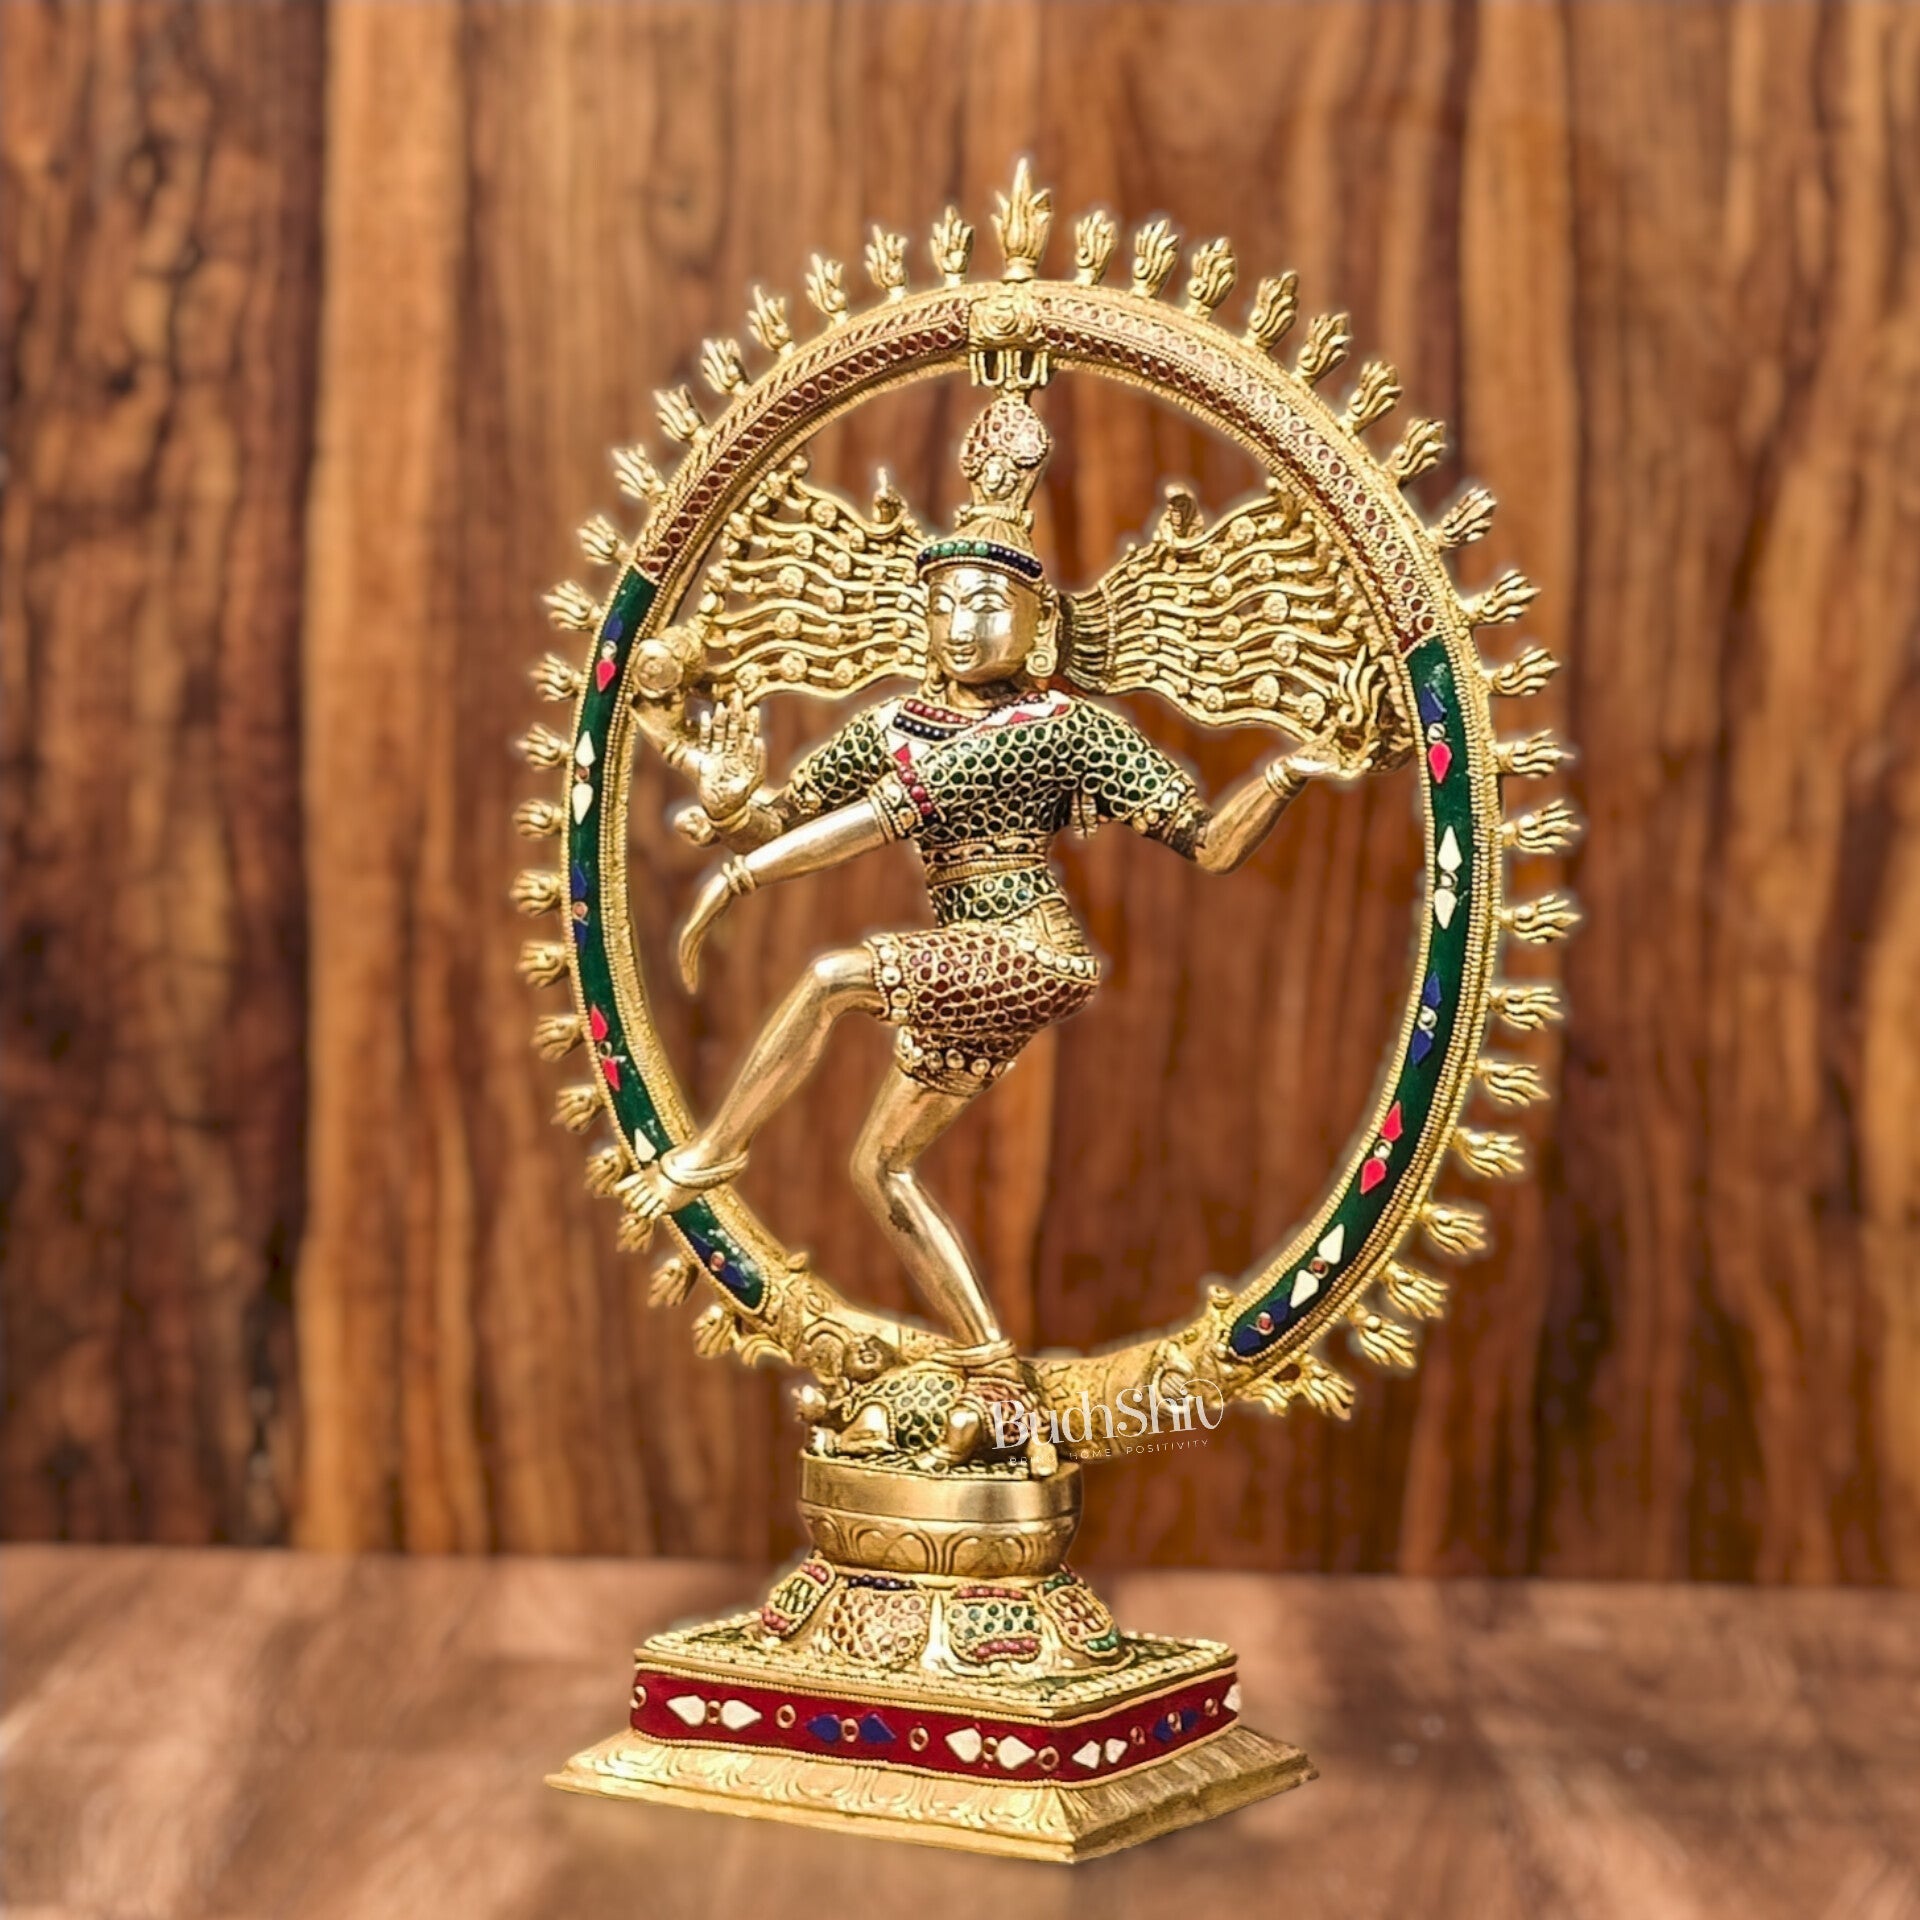 Exquisite Brass Nataraja Statue with Brass Ring - Handcrafted Masterpiece 21" - Budhshiv.com